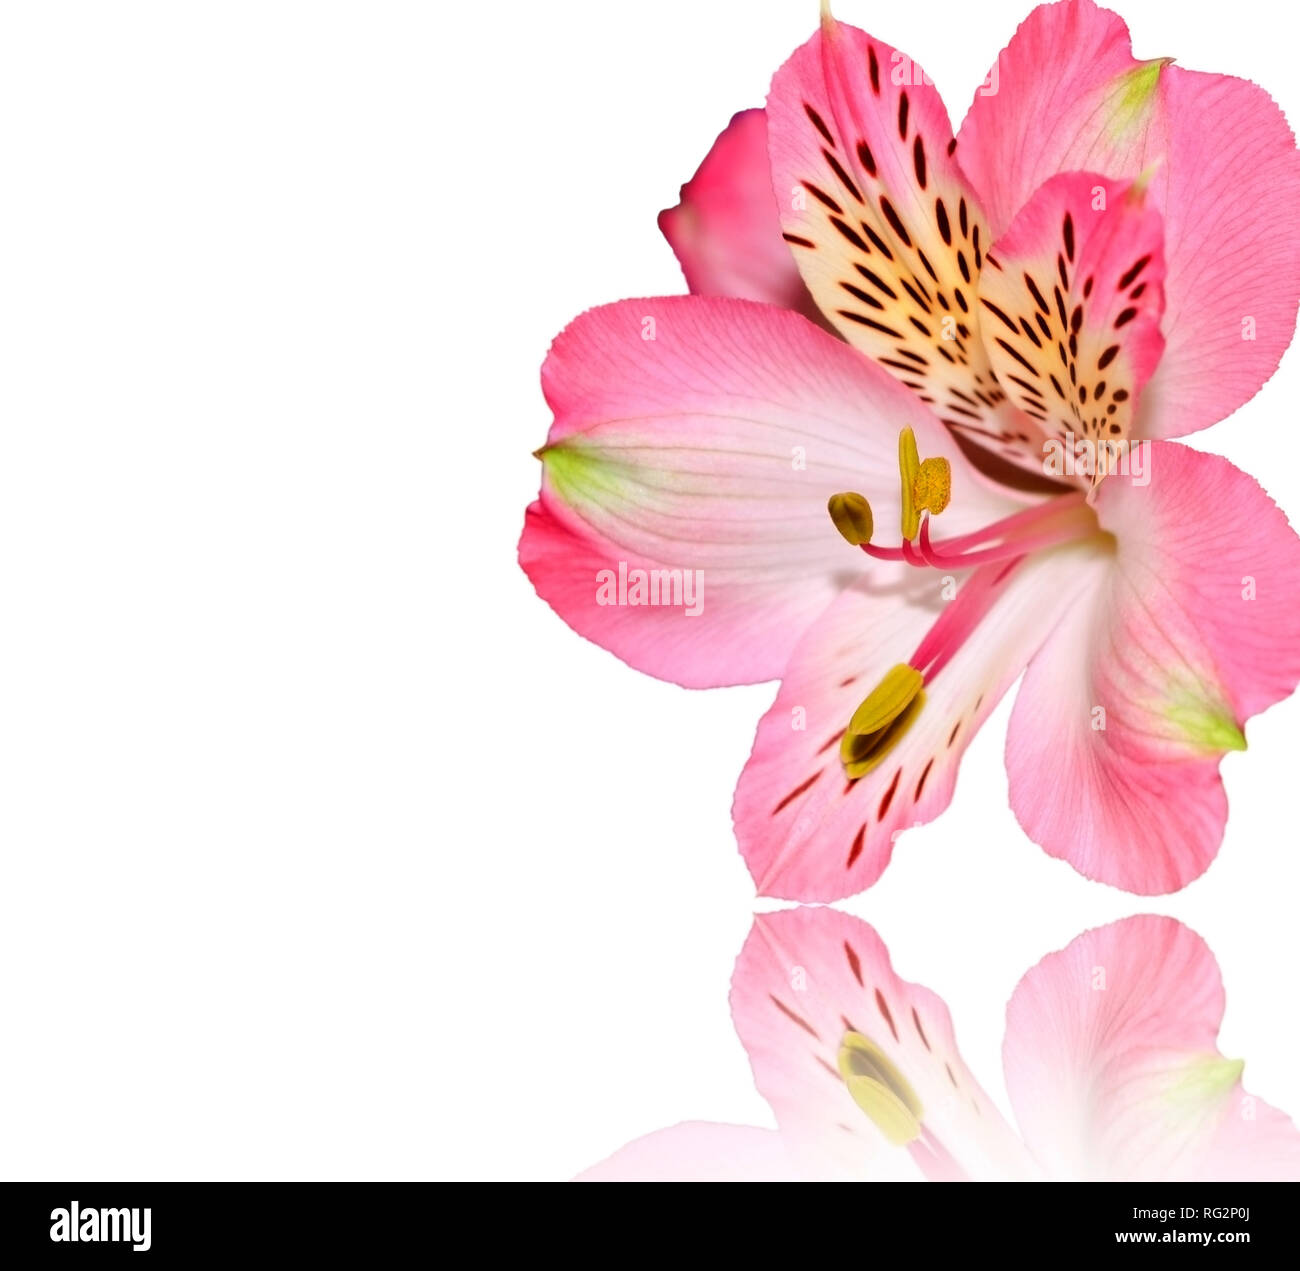 In the photo, one beautiful pink orchid close up, isolated on a white background and with a mirror reflection Stock Photo